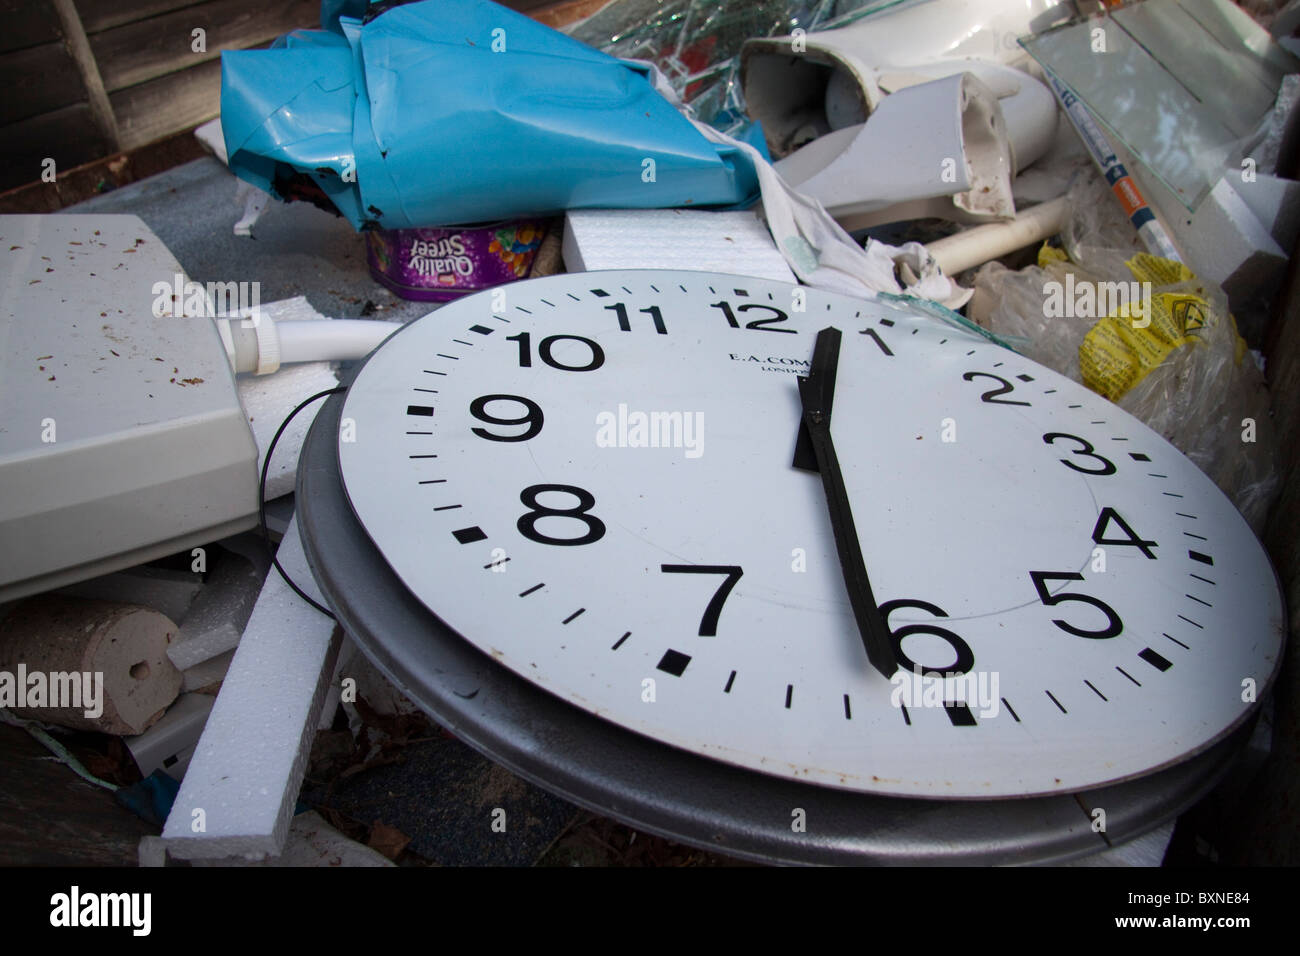 A large clock face with the hands at 12:31 on a pile of rubbish. Stock Photo